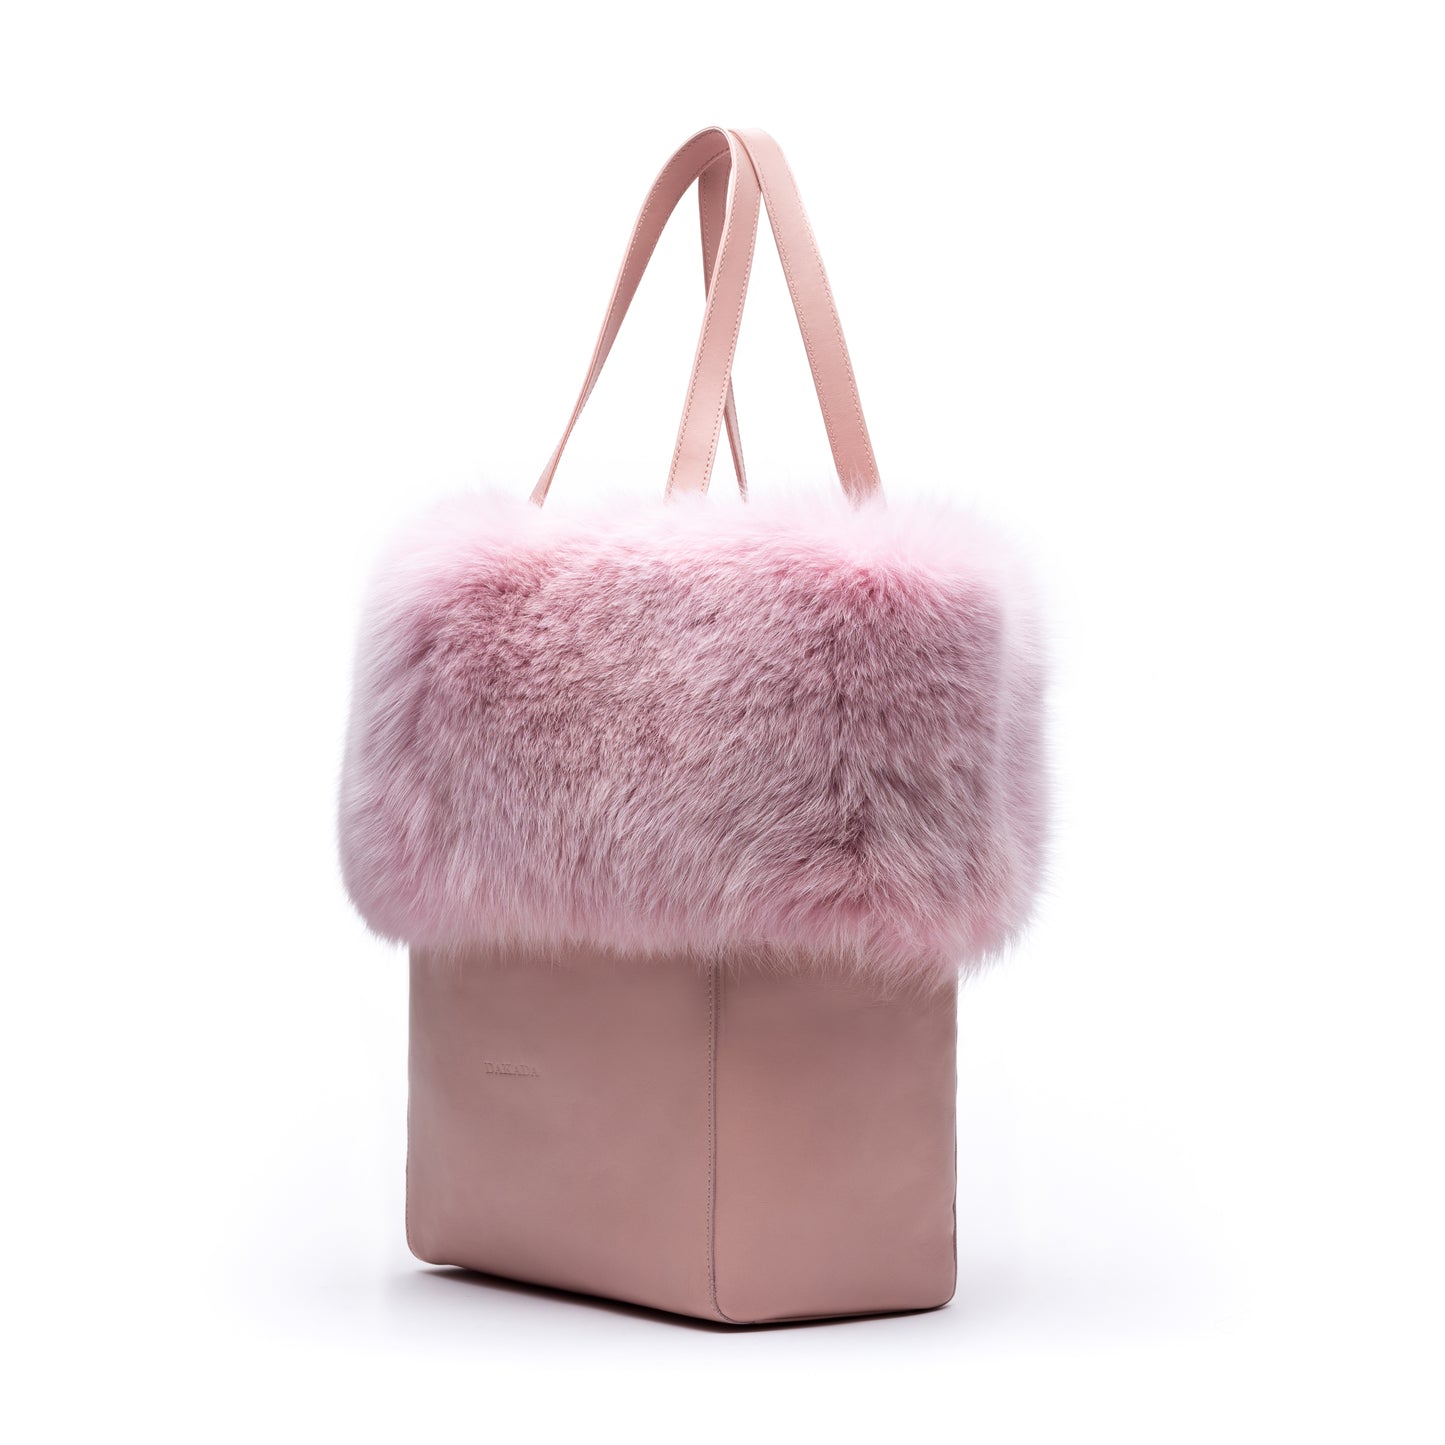 Kaley- Pink Leather Tote with Pink Fox